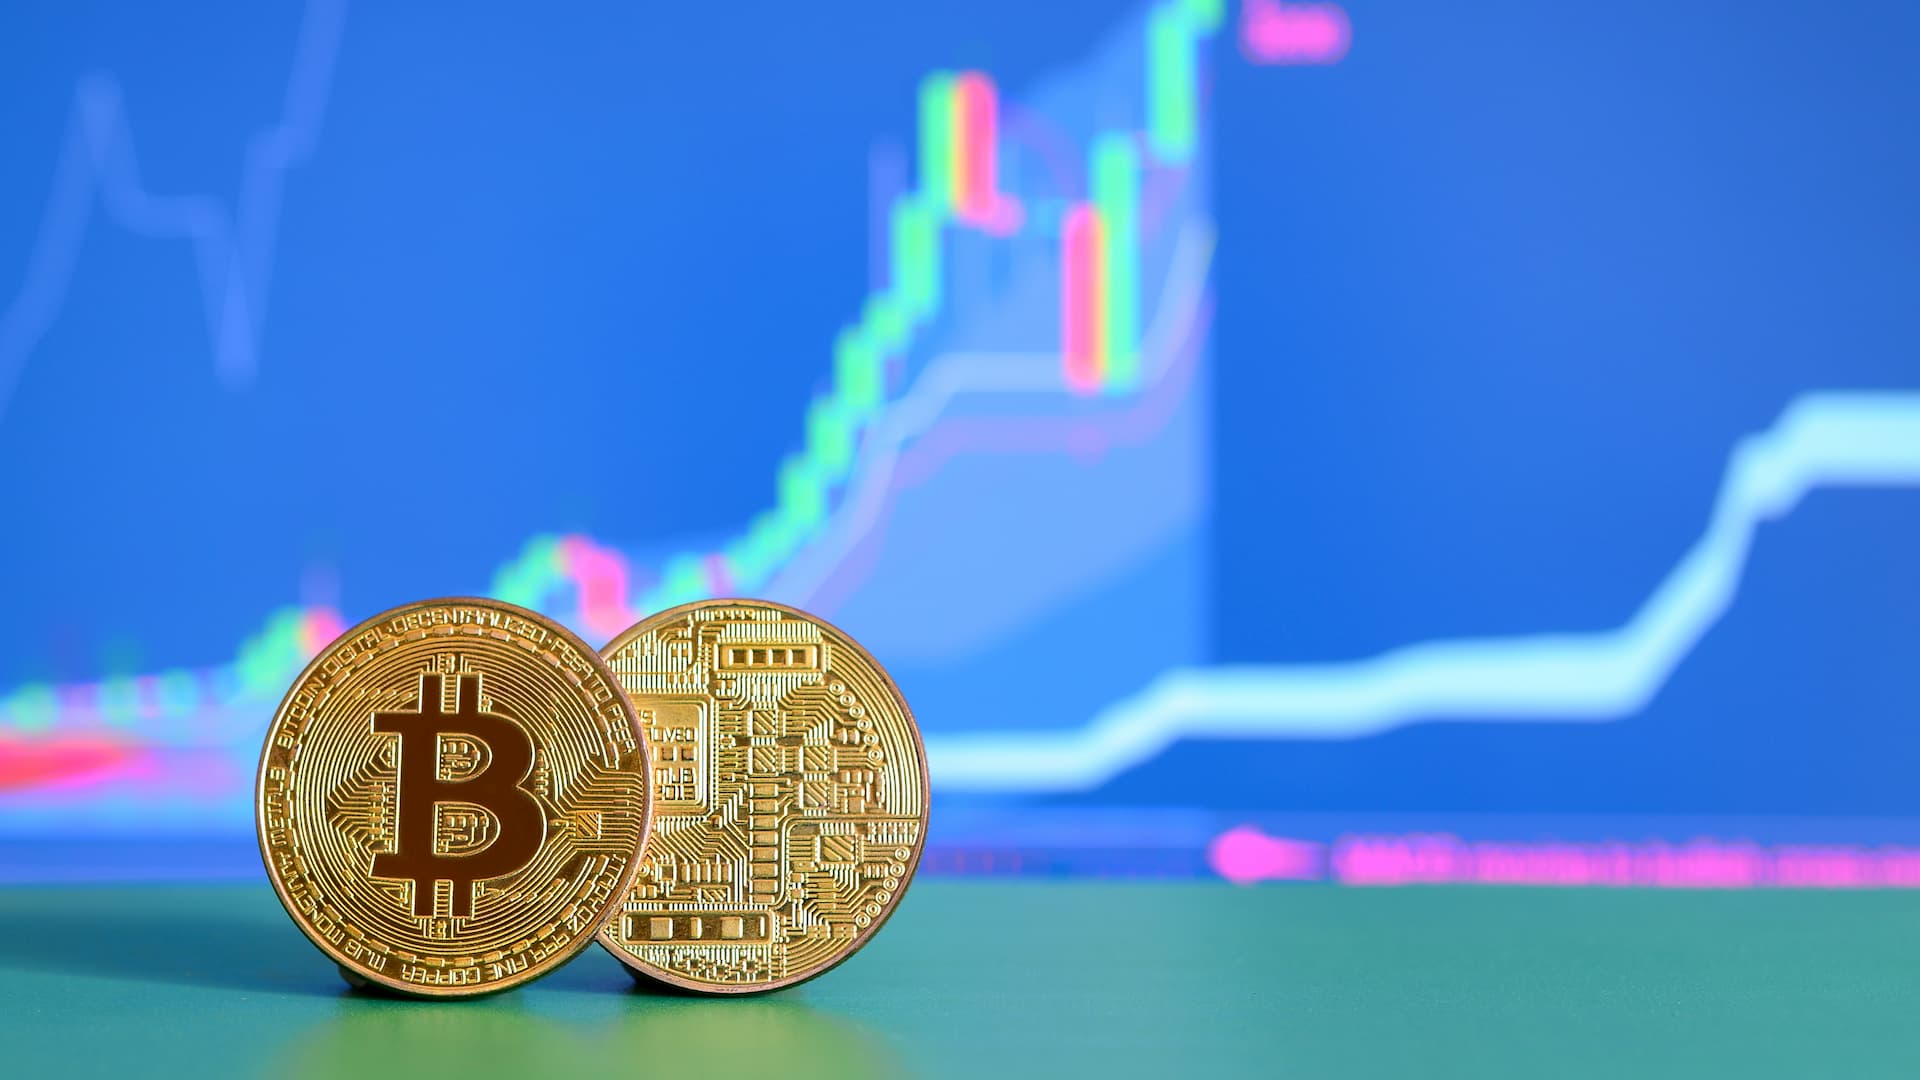 Crypto Expert Tom Lee on Bitcoin: “Evidence Is Mounting ...